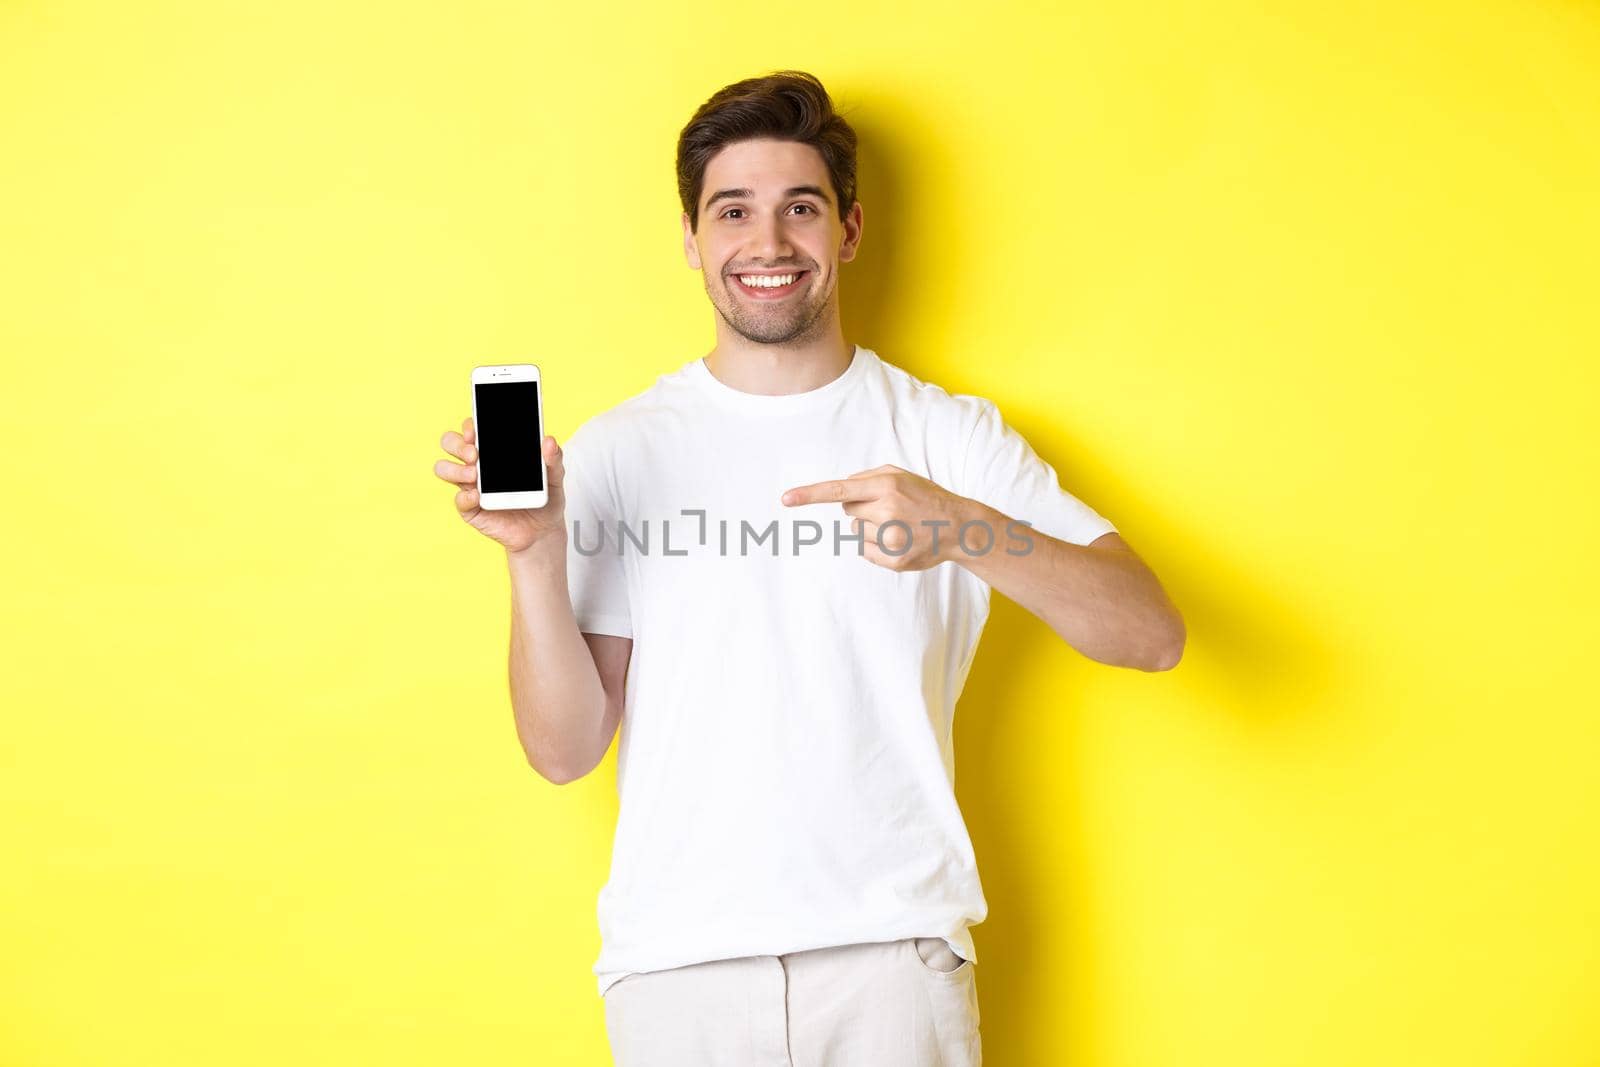 Image of attractive young man pointing finger at smartphone screen, showing an app, standing against yellow background.